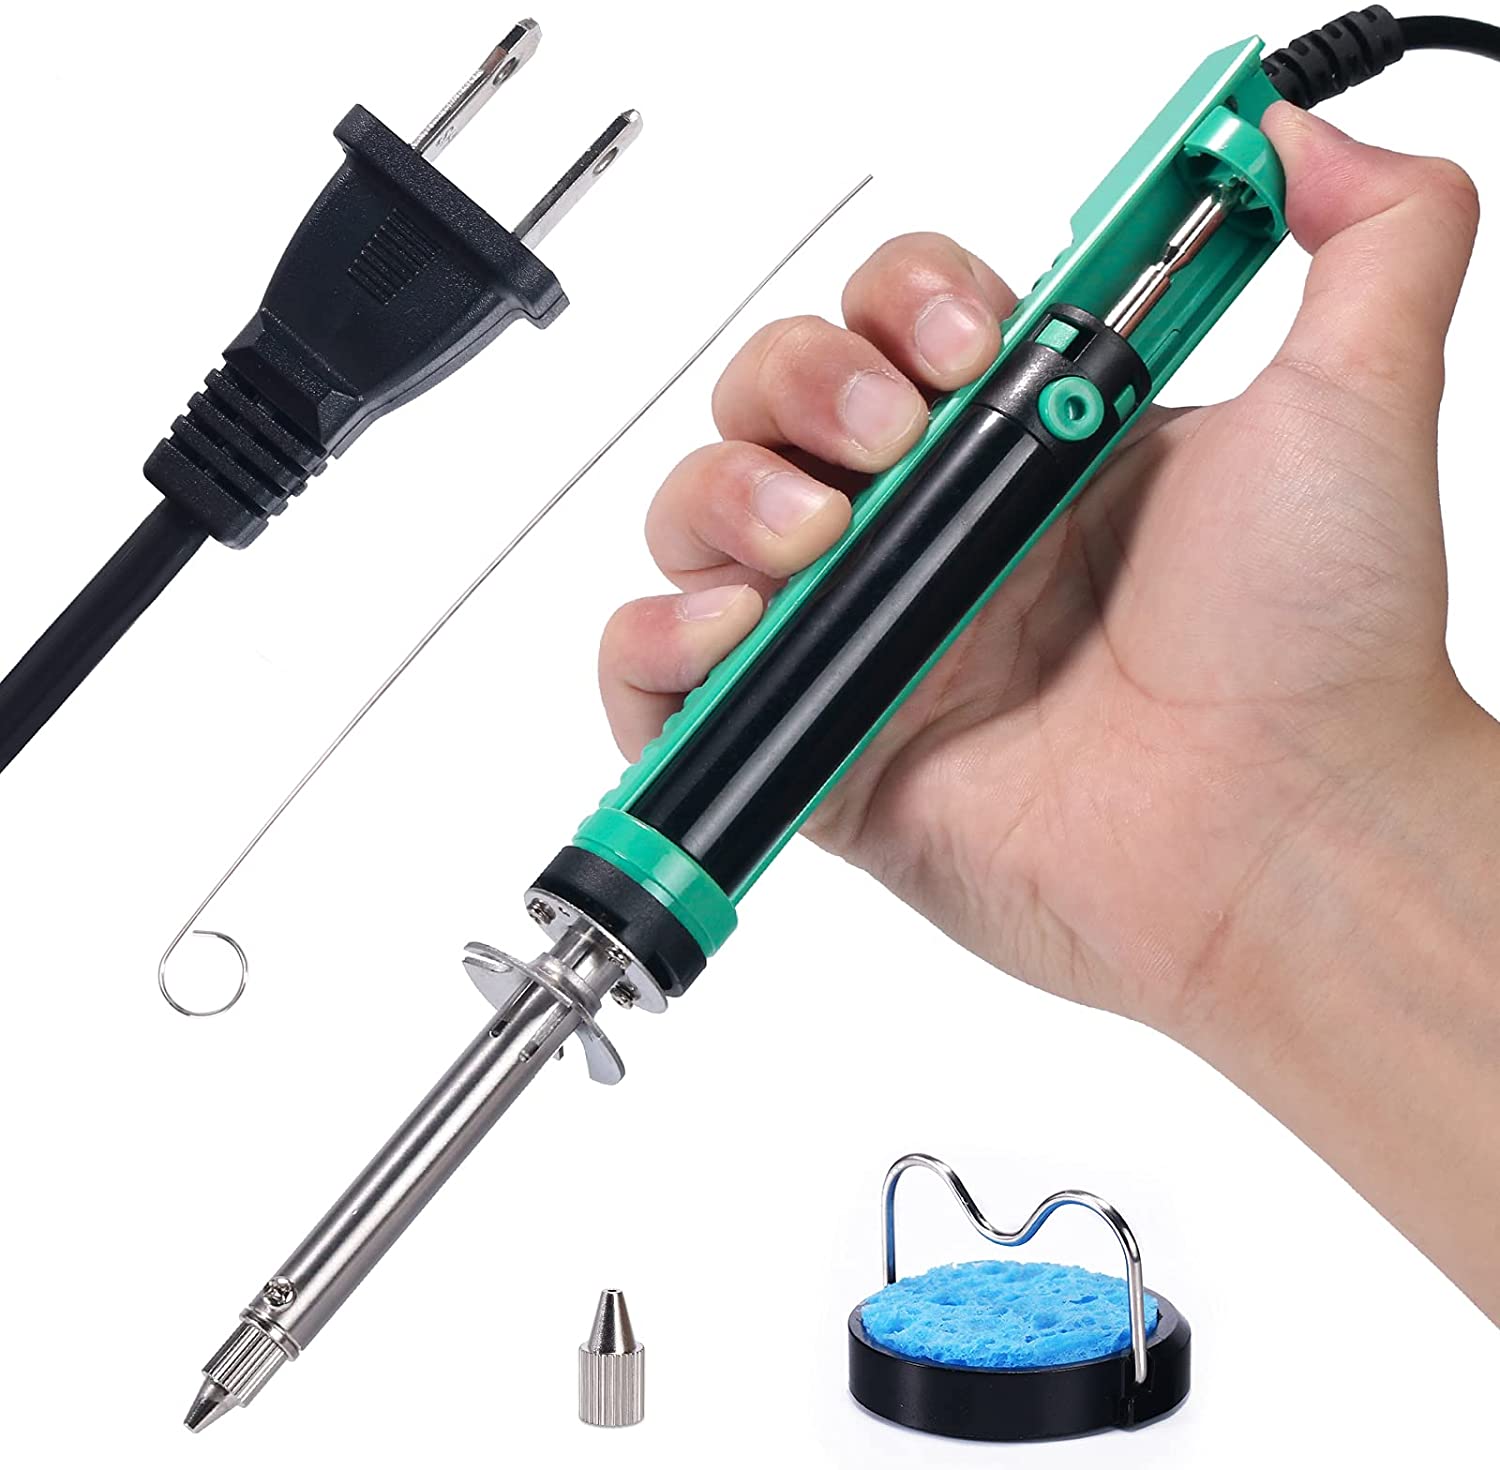 YIHUA 929D-V Electric Desoldering Iron Solder Sucker Desoldering Pump with Shorter Charging Handle and Desoldering Nozzles 1.0mm 1.2mm for Through-Hole Desoldering